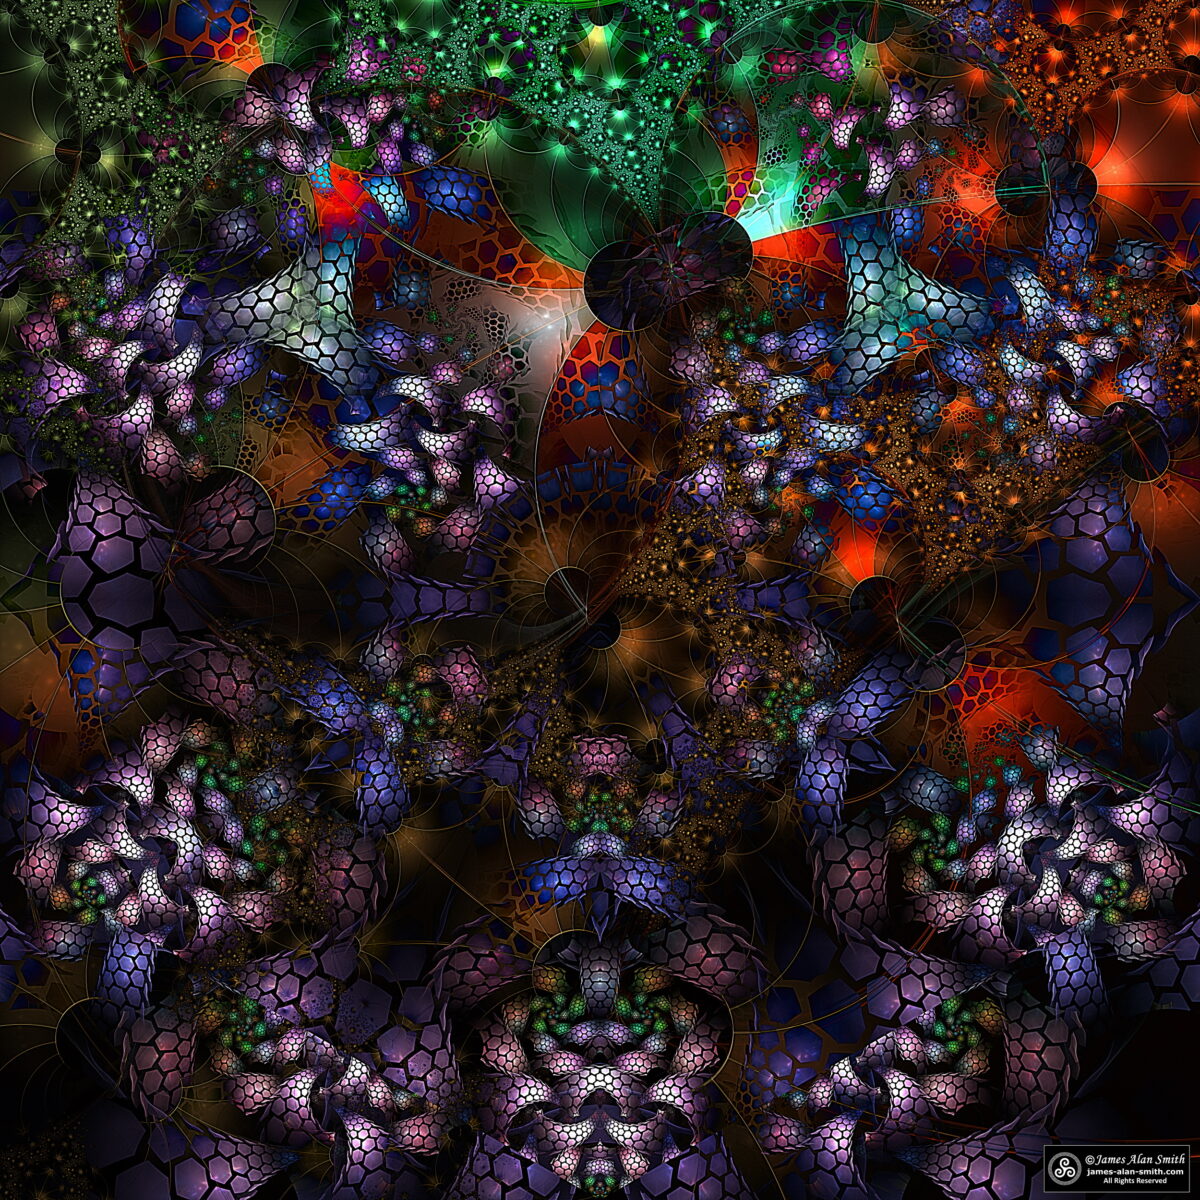 Aspects of HoloFractal Space: Artwork by James Alan Smith